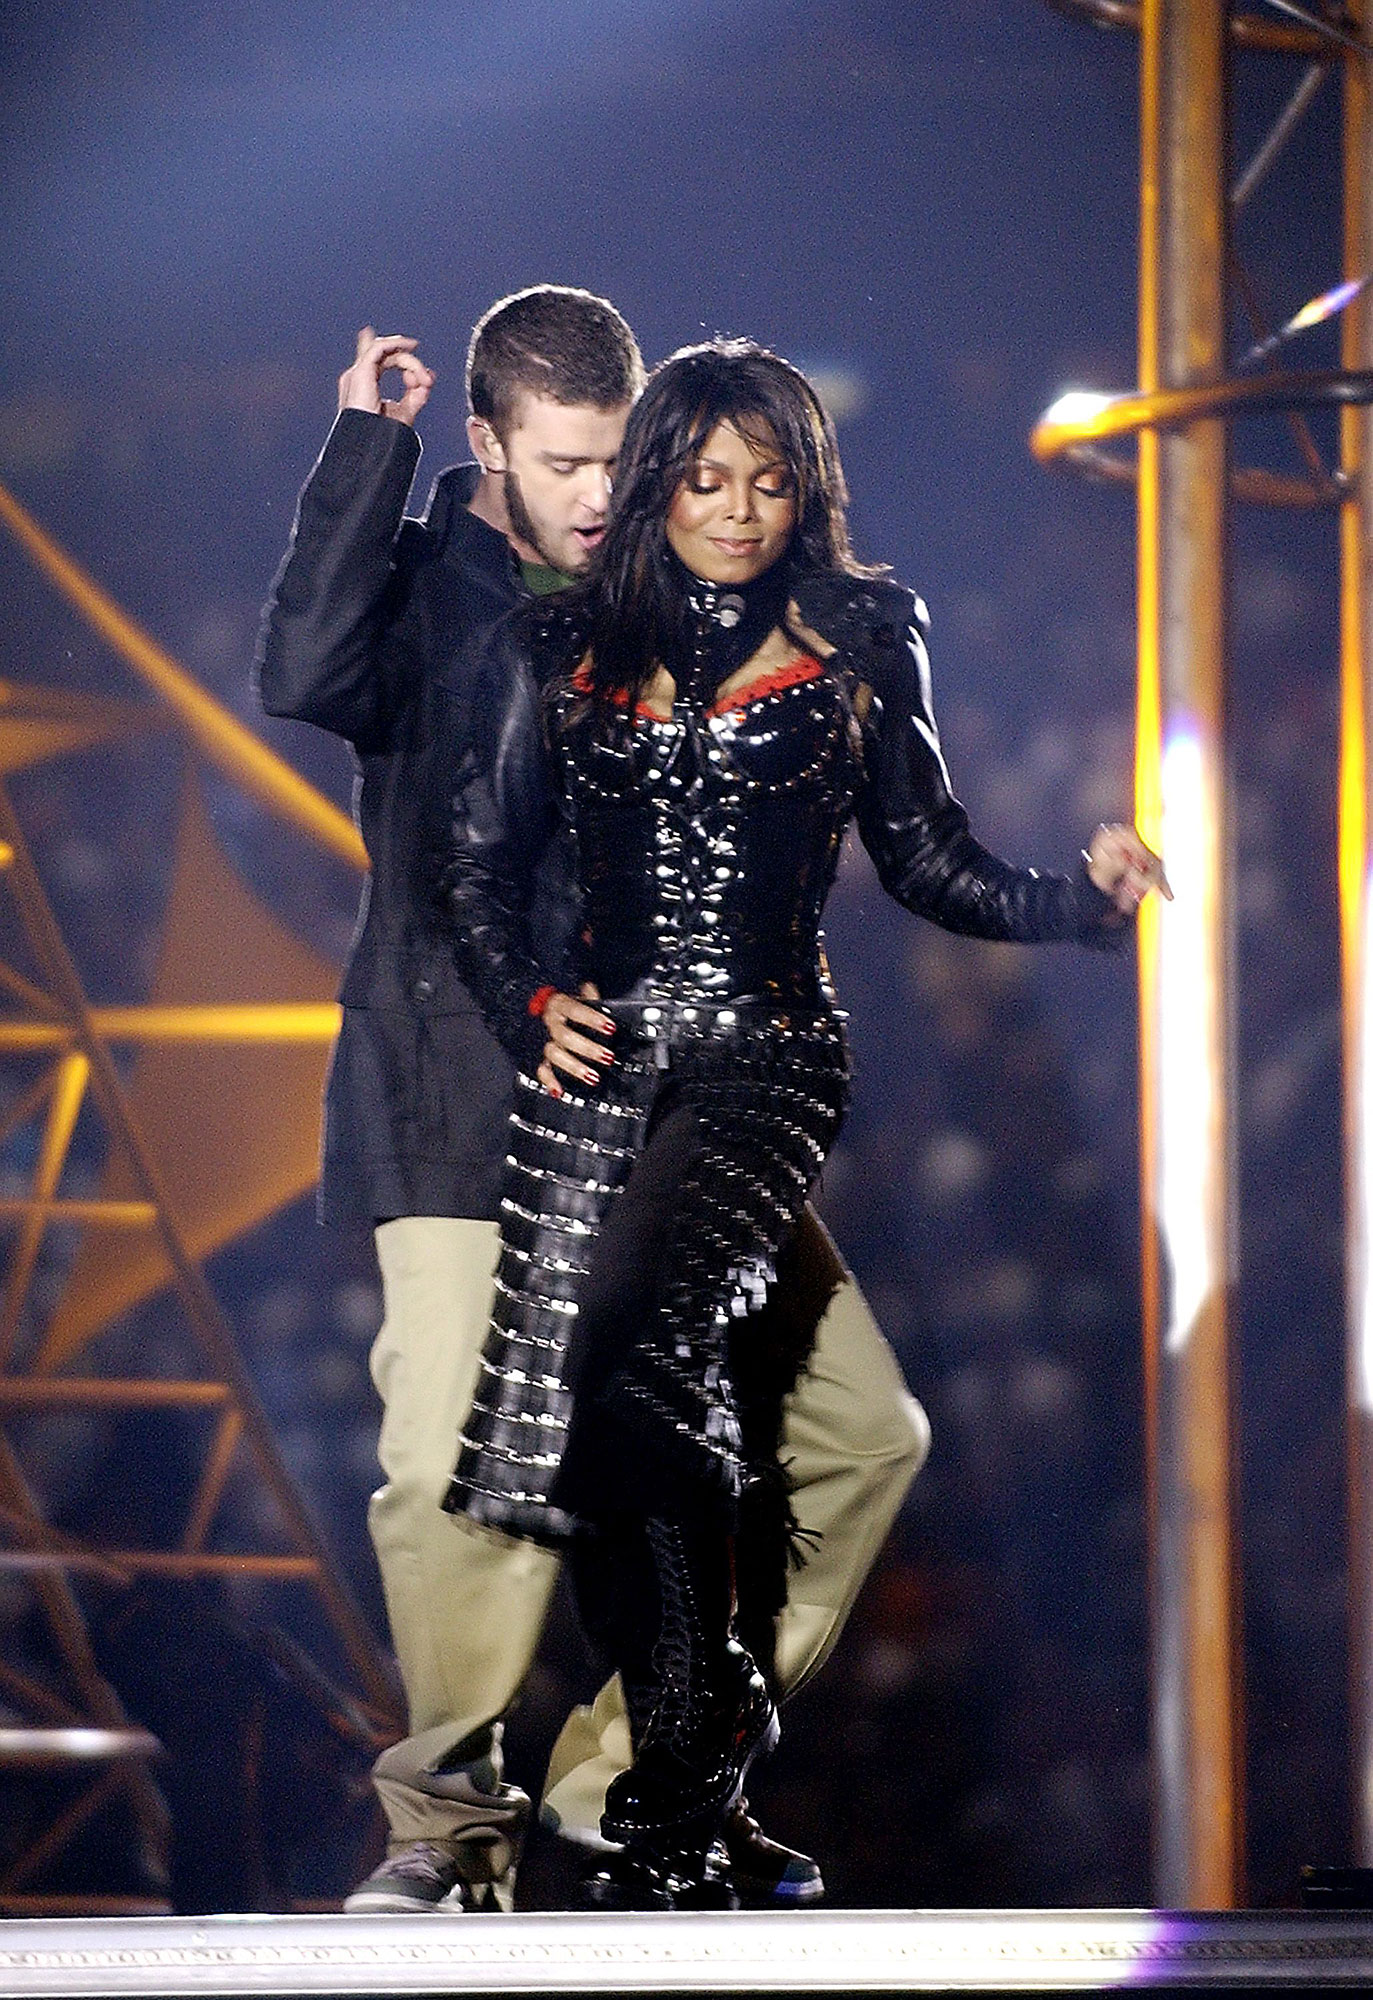 Janet Jackson Hulu Doc to Cover Super Bowl Drama When It Airs, More